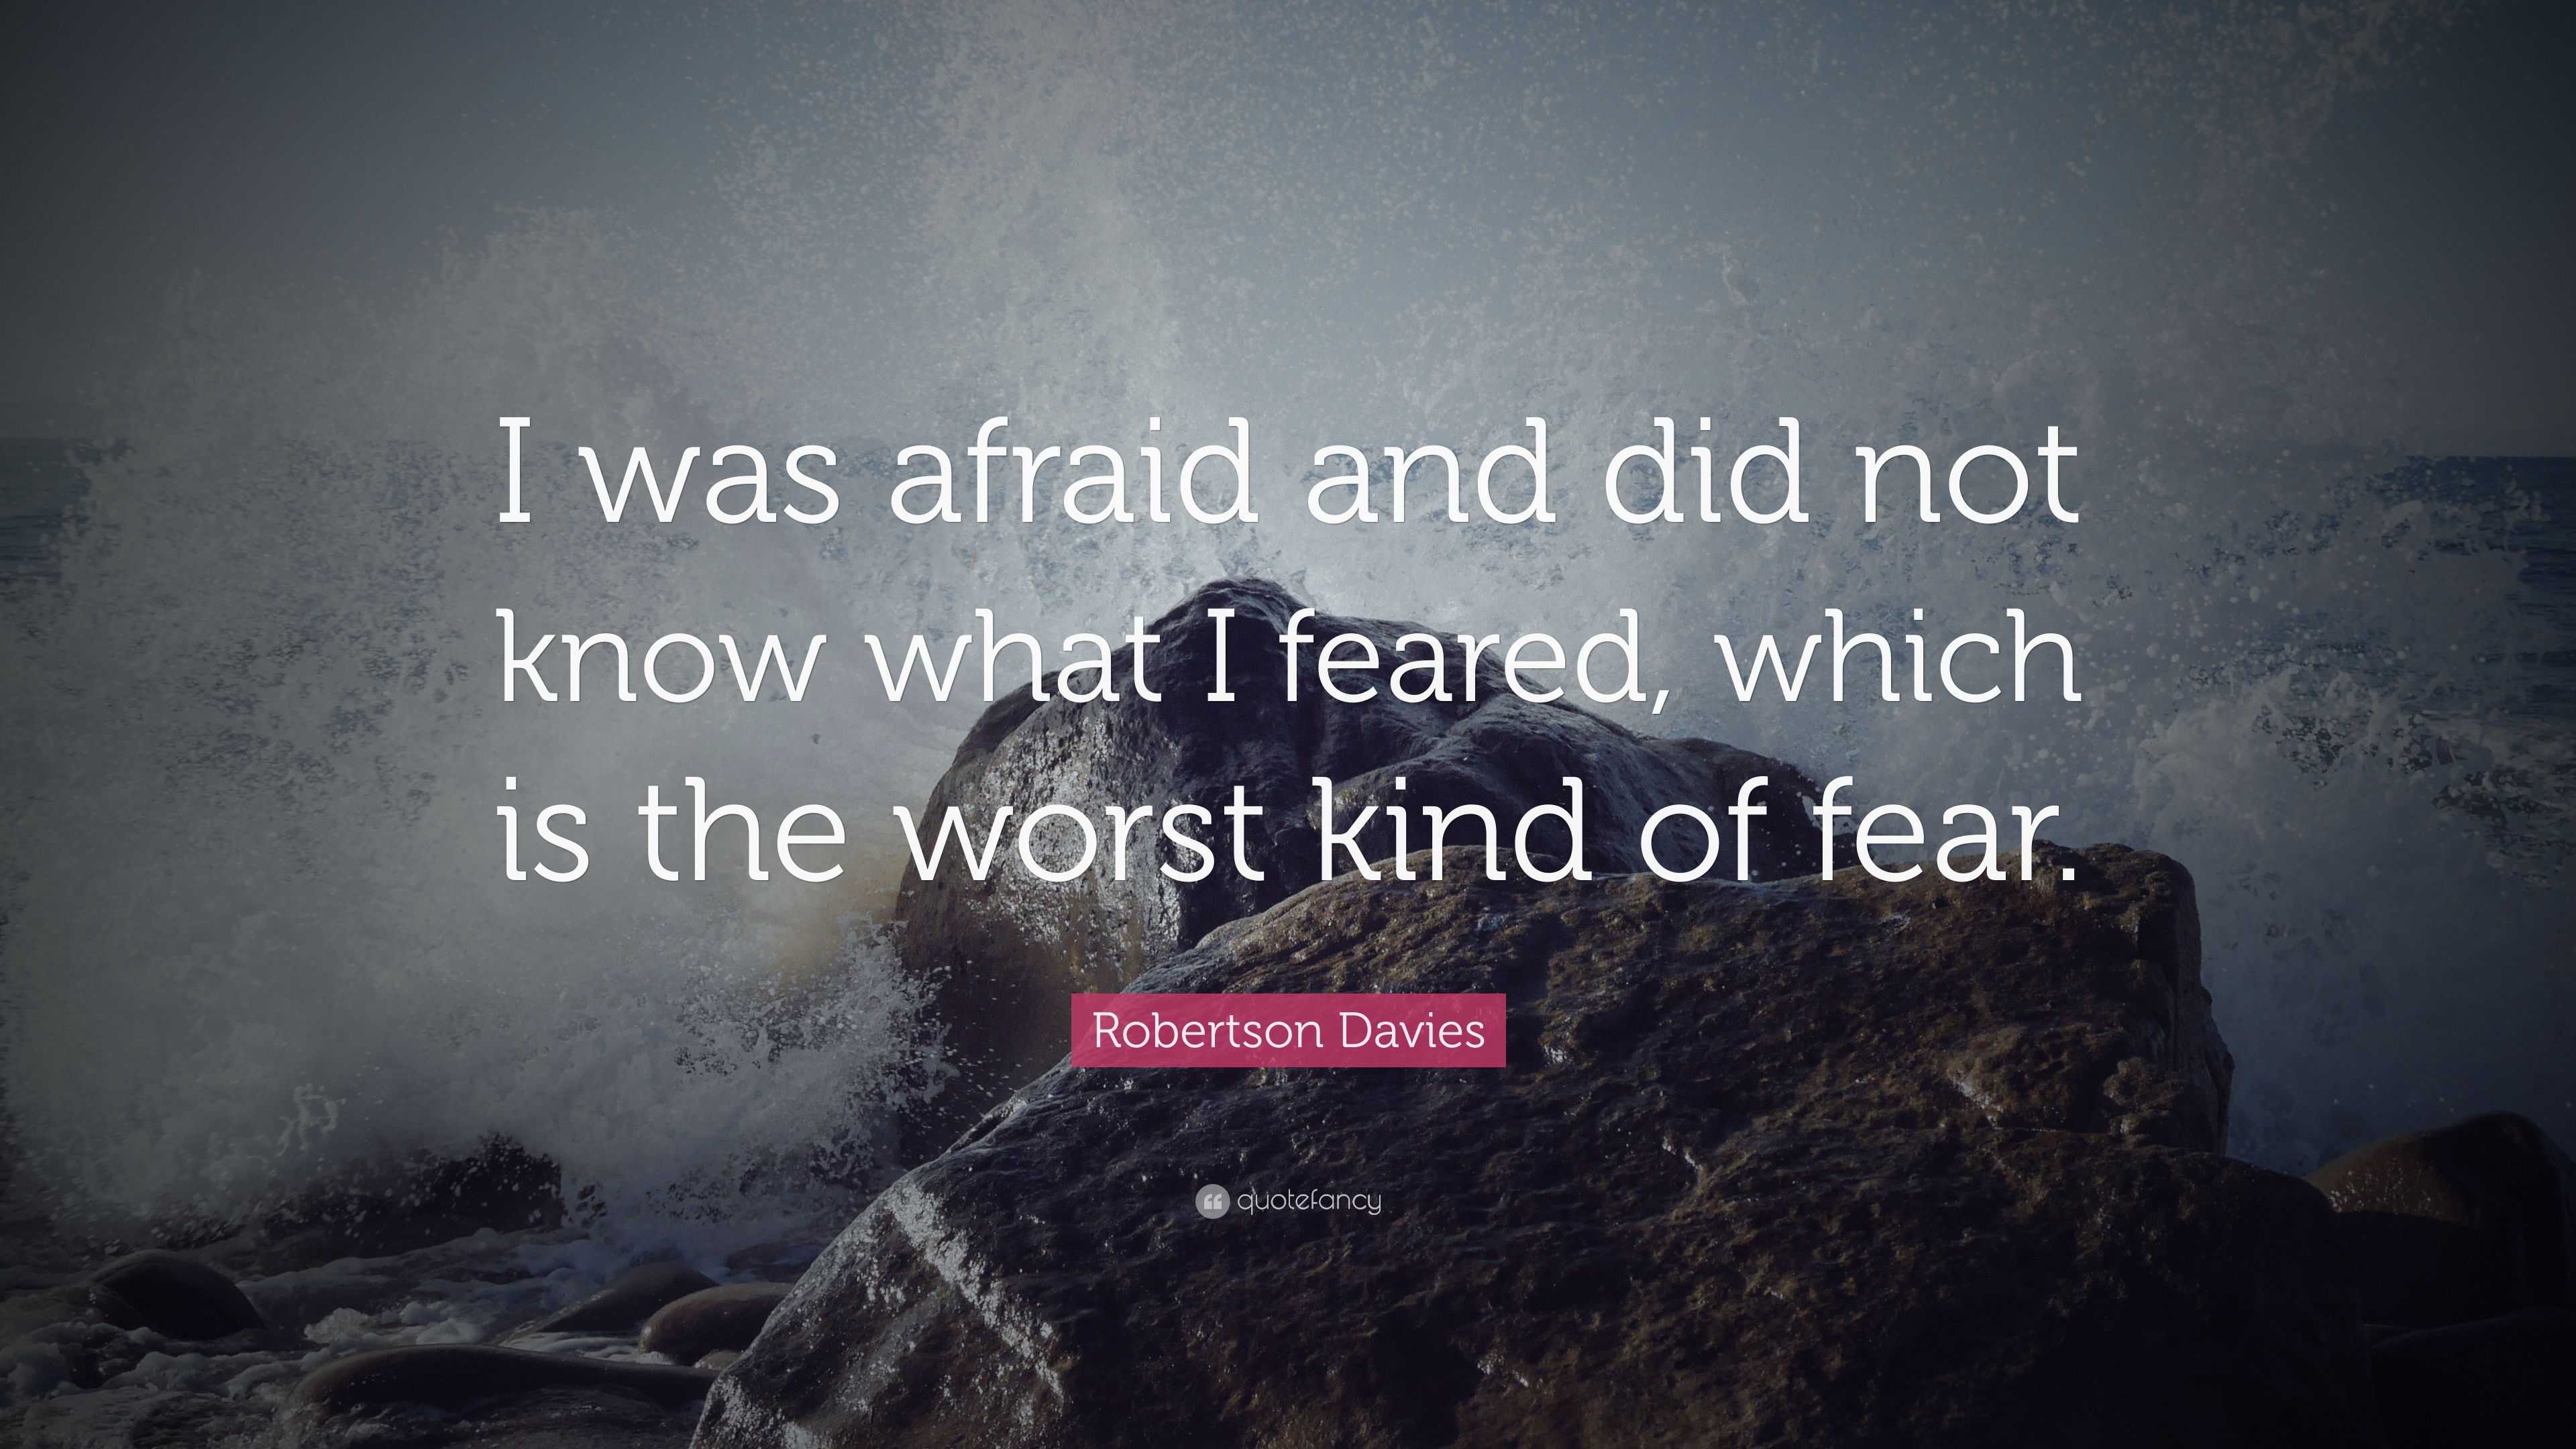 Robertson Davies Quote: “I was afraid and did not know what I feared ...